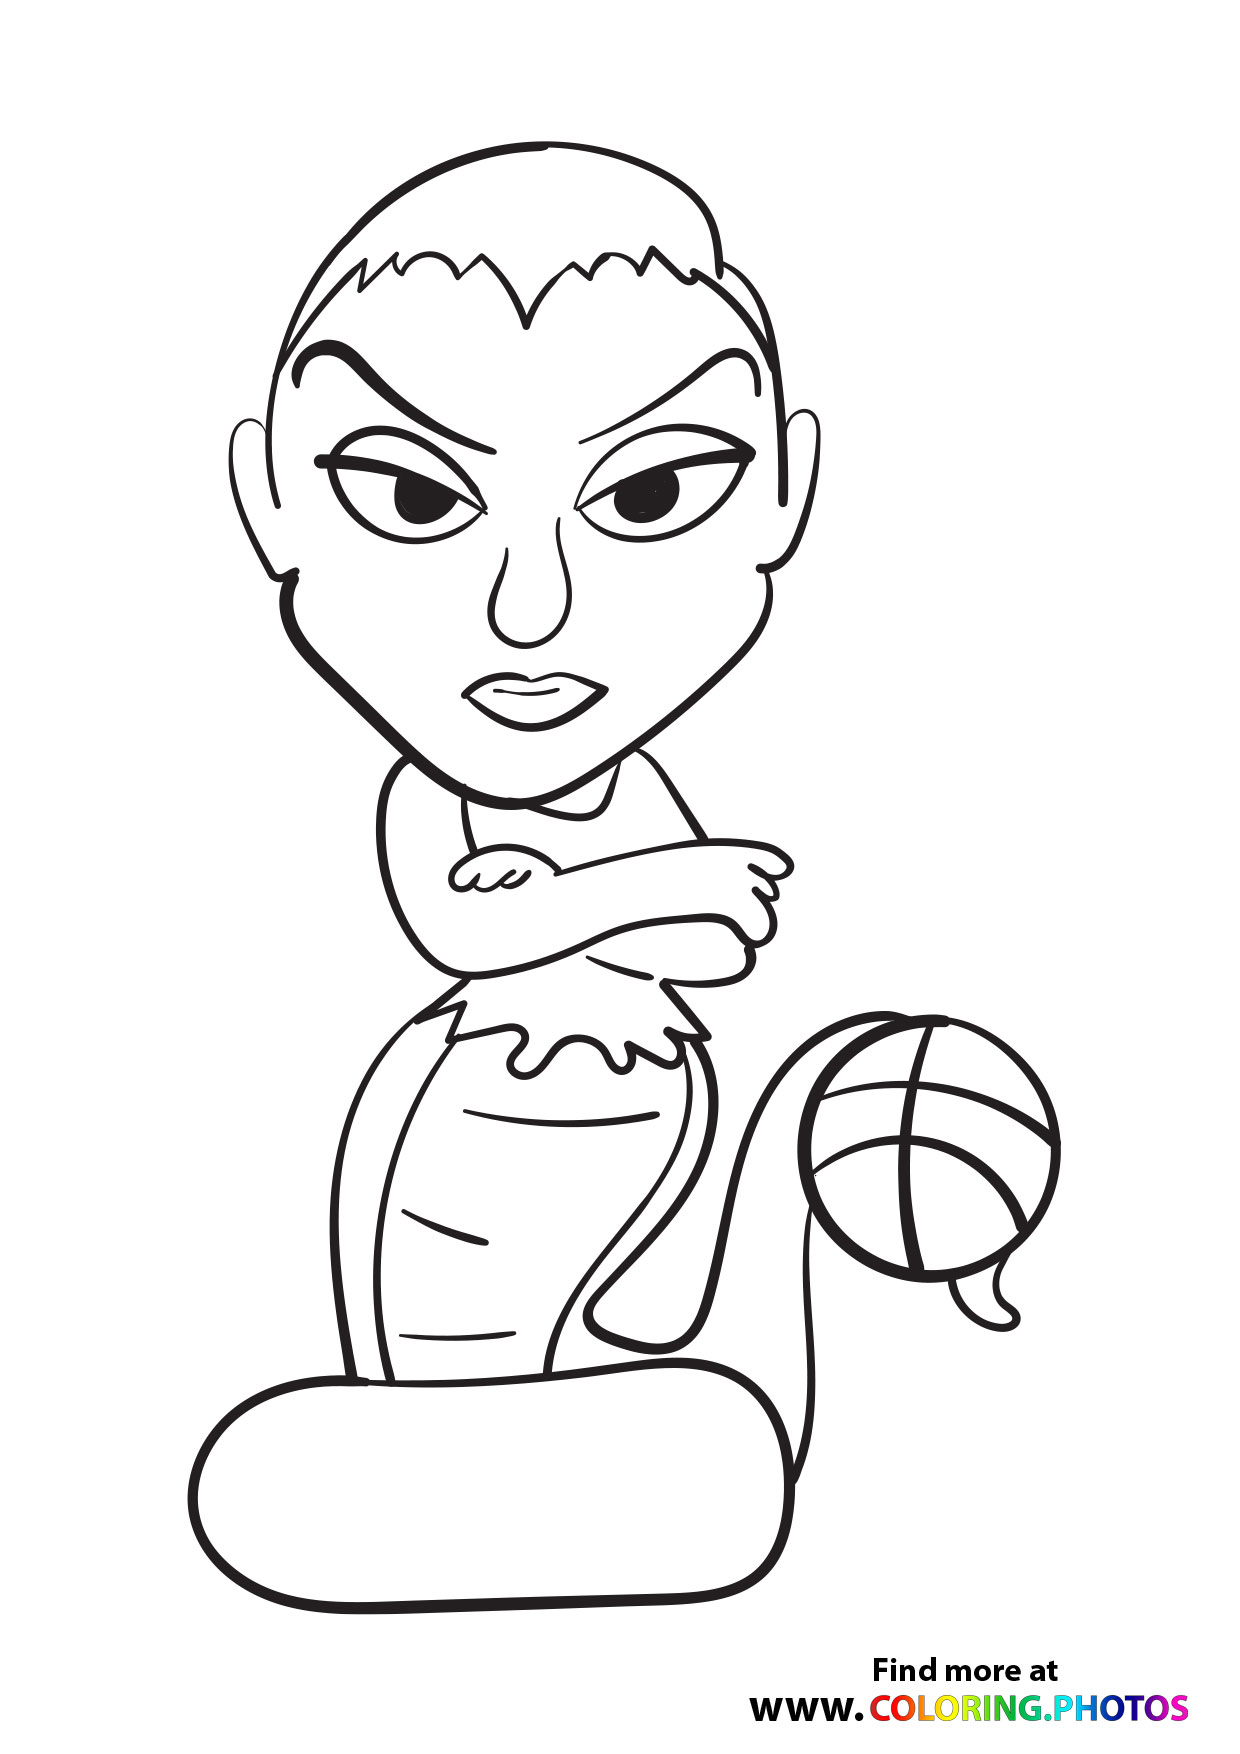 Space Jam A New Legacy Logo Coloring Page